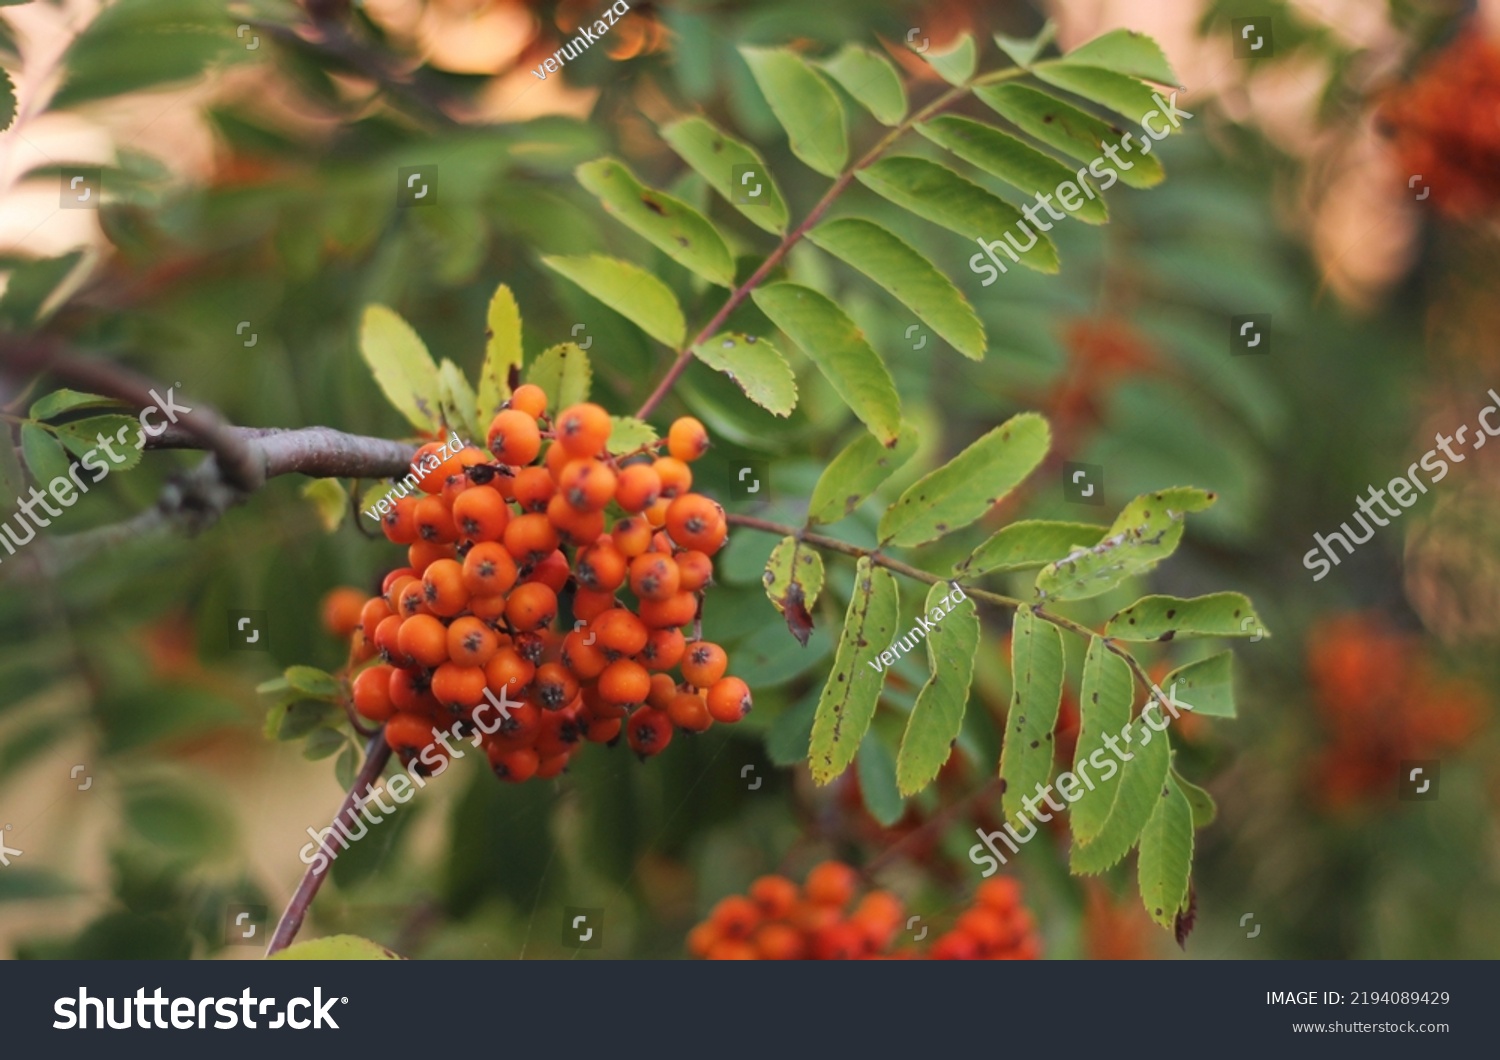 A rowan branch with corymb of many bright orange pomes. Orange fuits of mountain-ash with green leaves in the background. A tree in summer with sunset sky behind. Little rowanberries in a cluster. #2194089429